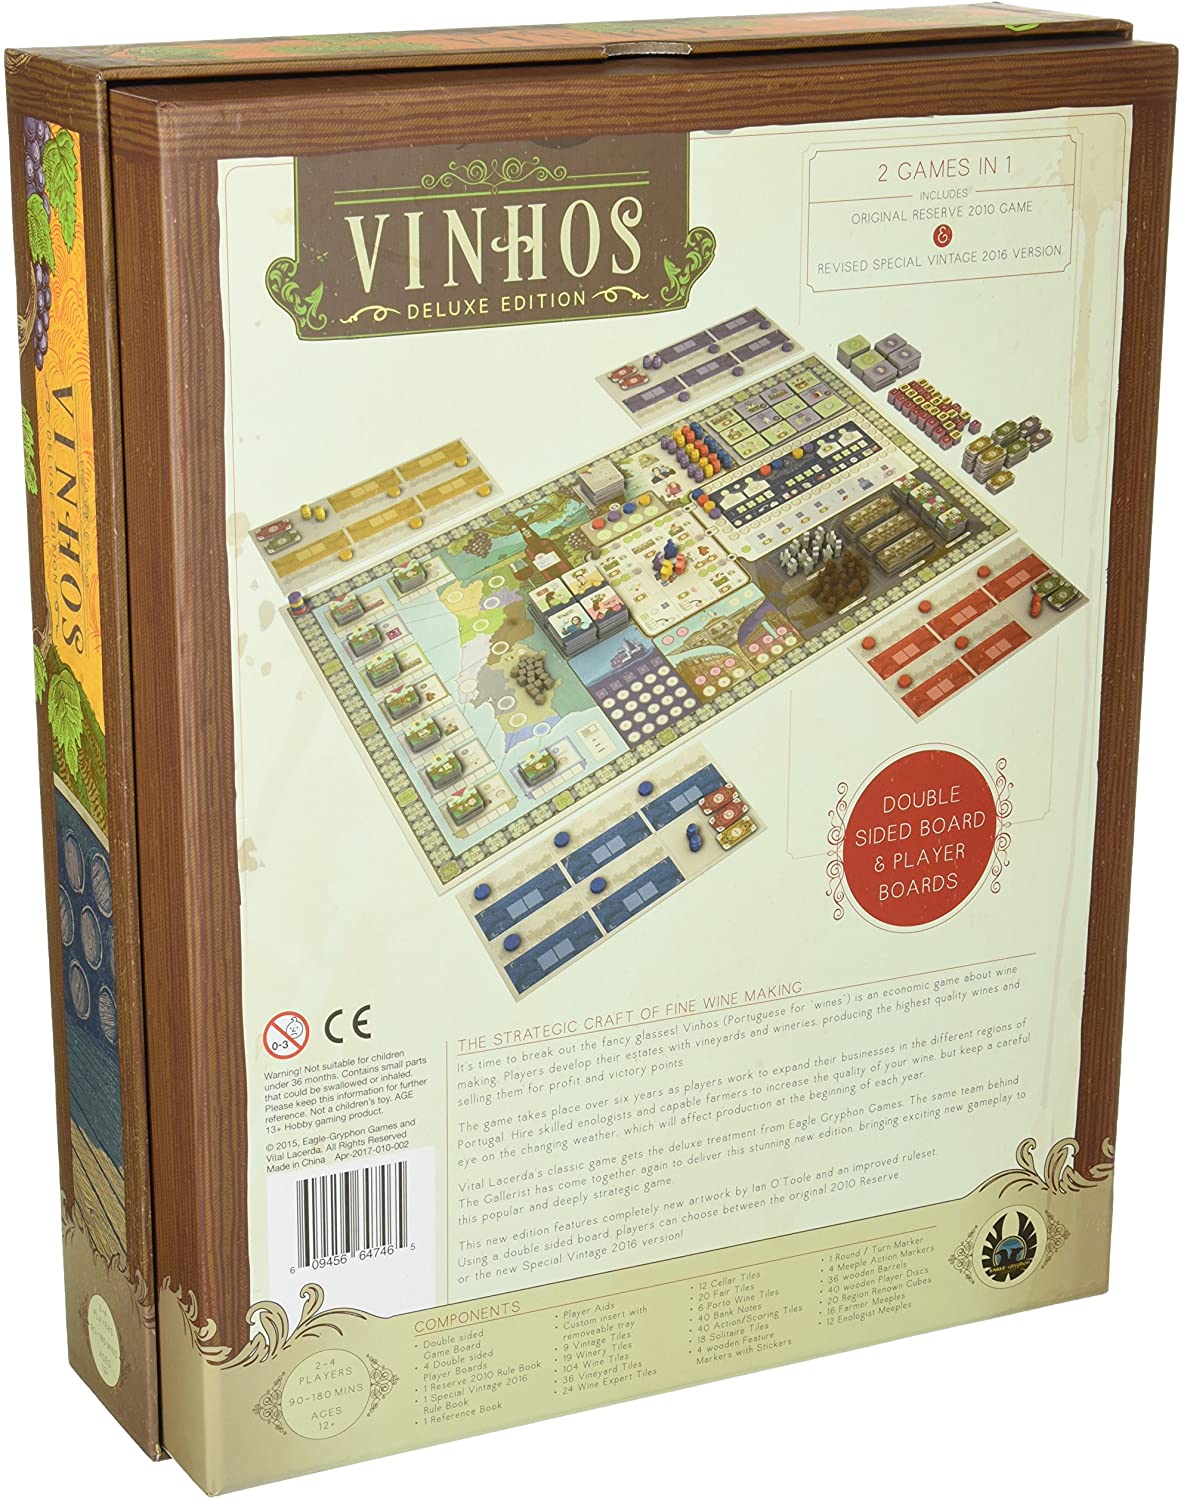 Find out about Vinhos Deluxe Edition